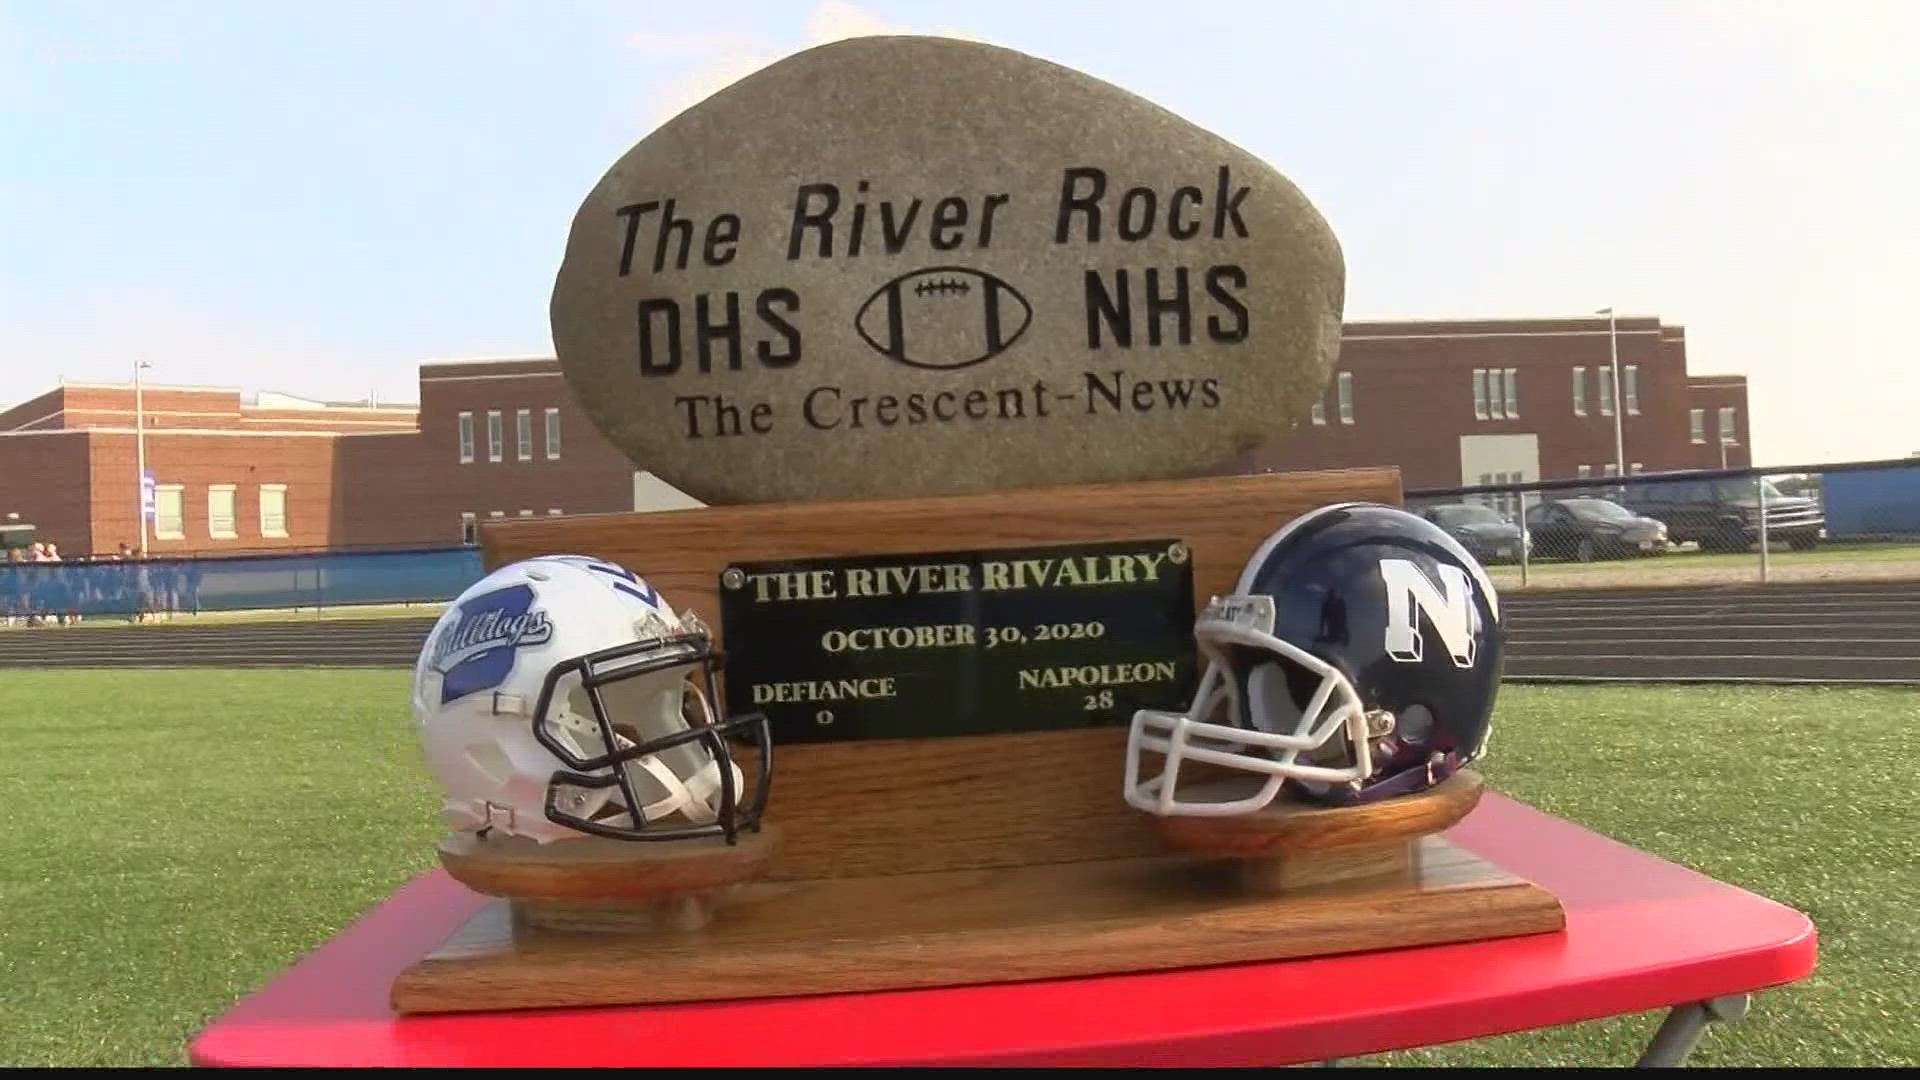 The Bulldogs prevailed over the Wildcats in a defensive battle to return the River Rock trophy back to Defiance.